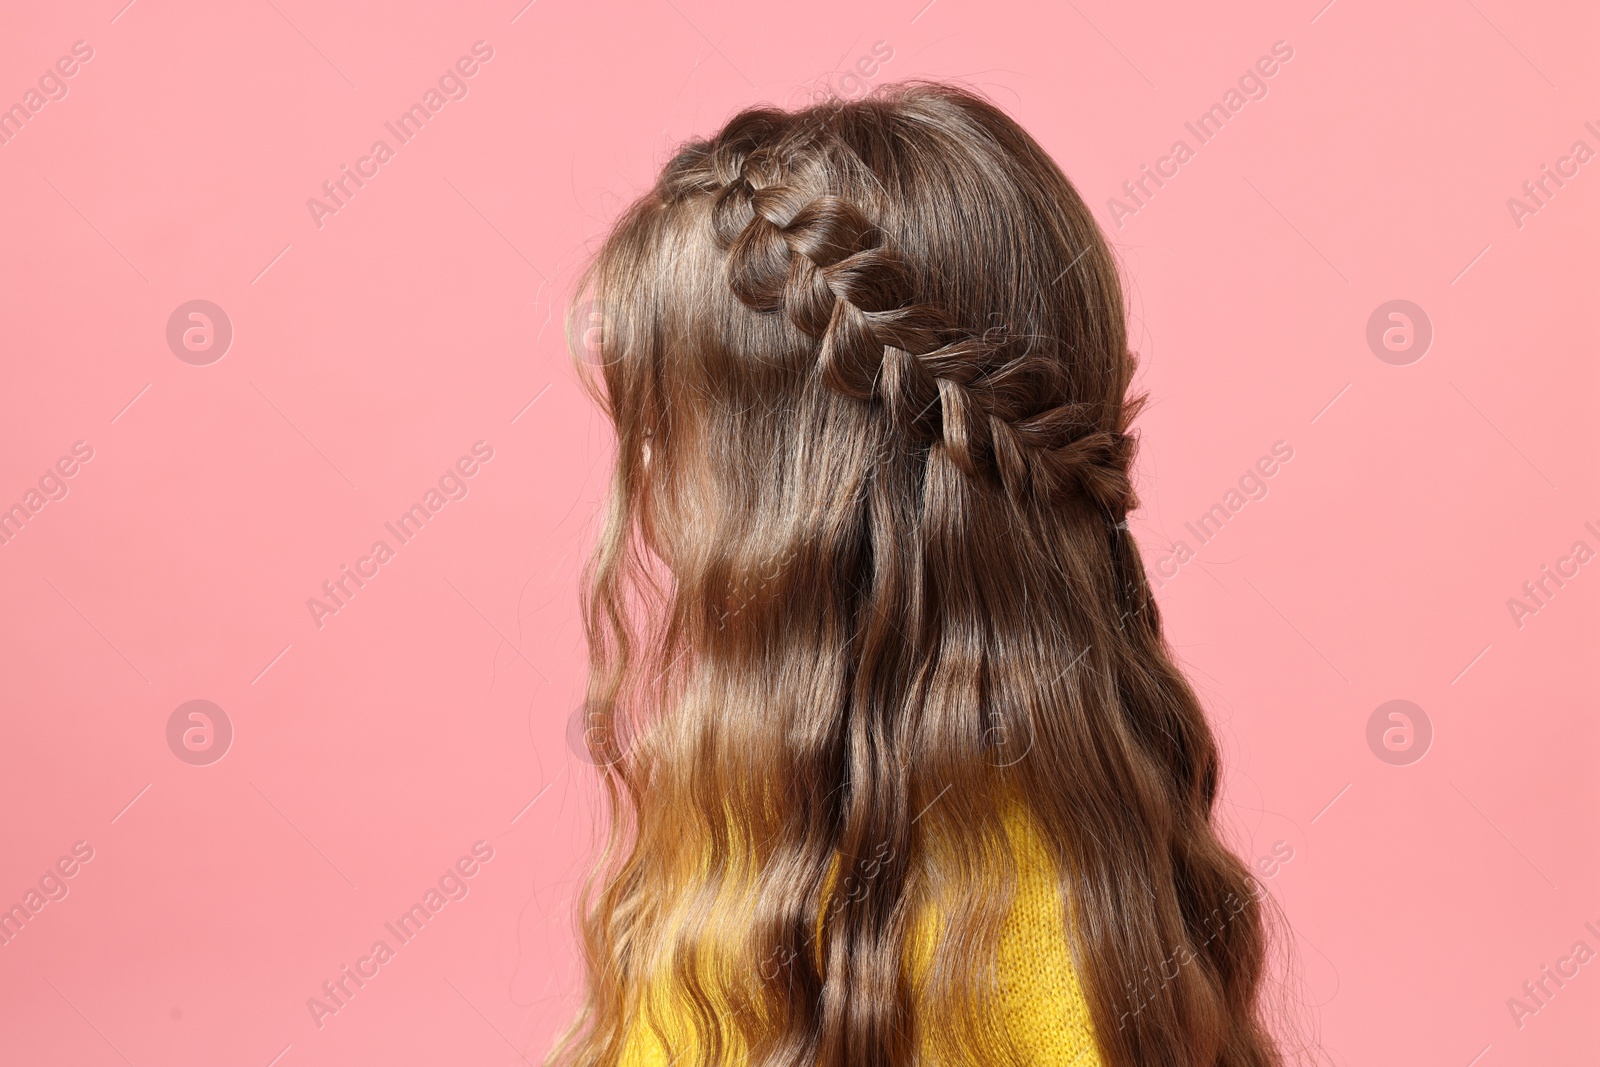 Photo of Little girl with braided hair on pink background